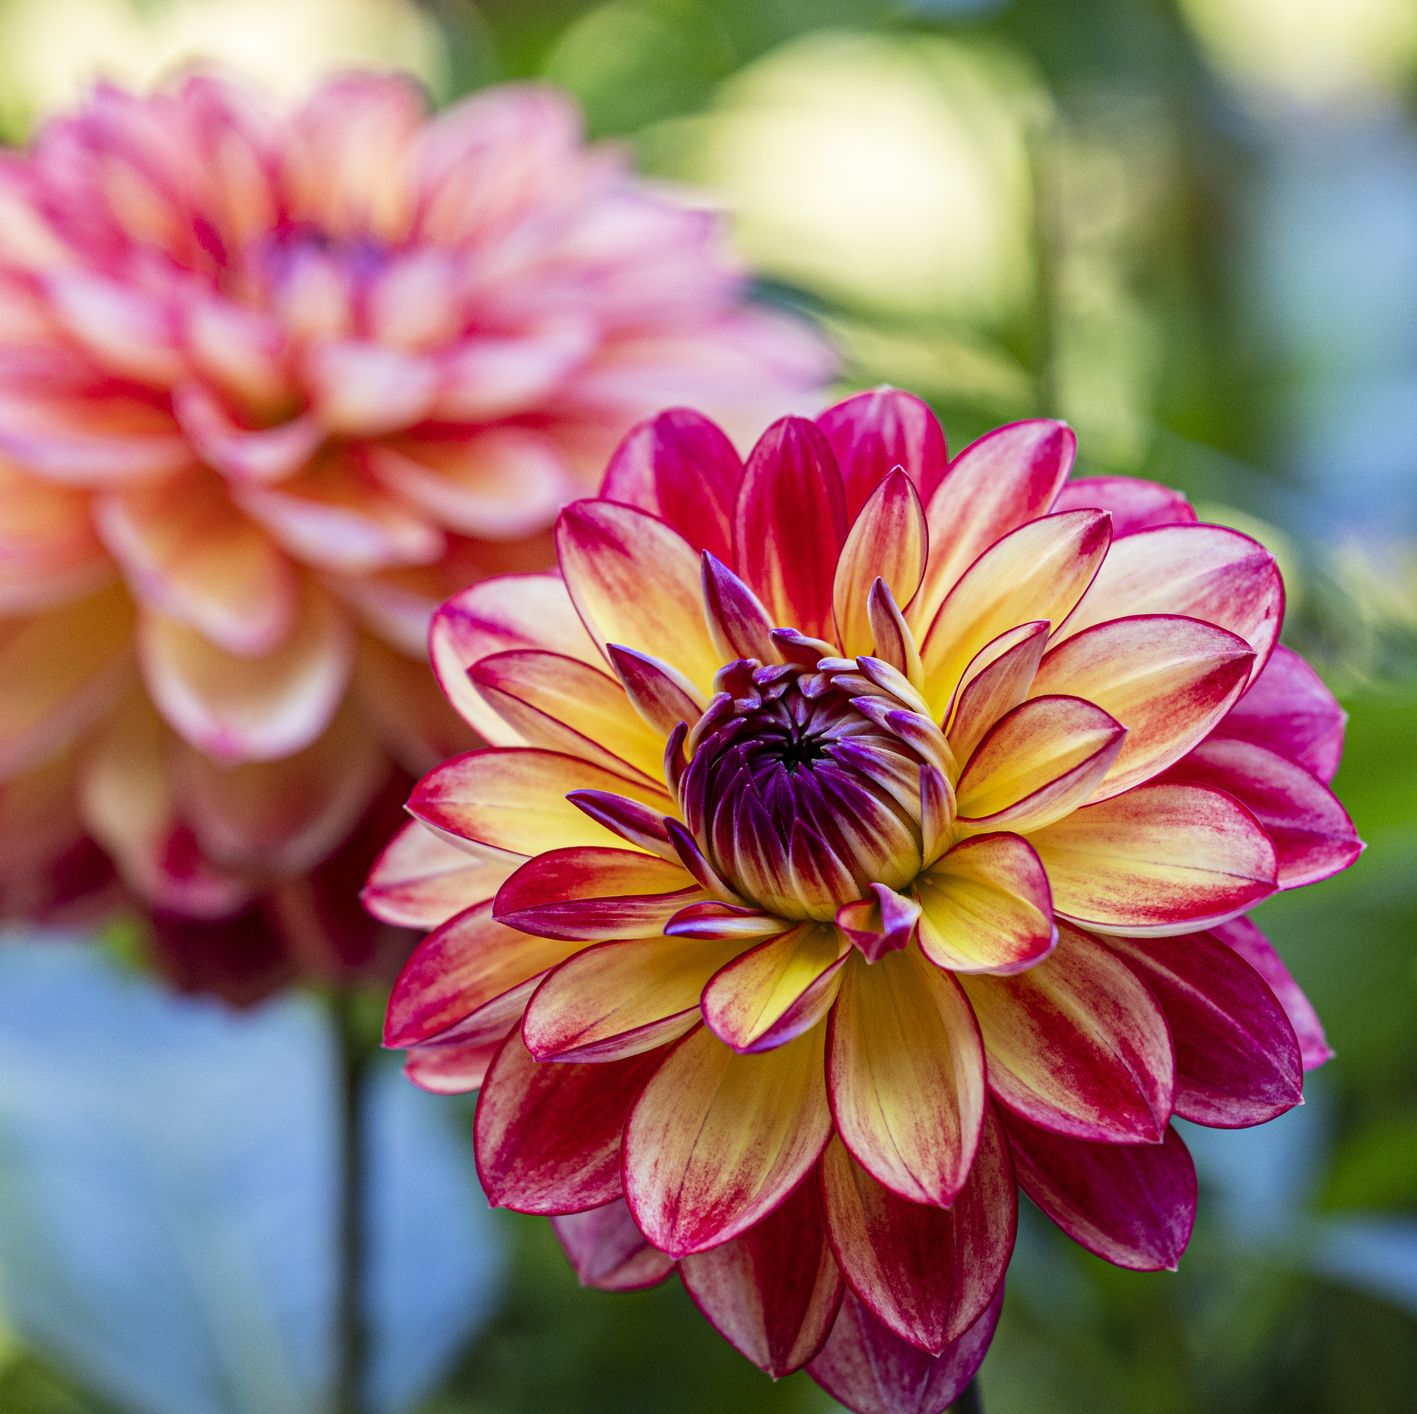 Did You Know Your Birth Month Flower Has a Hidden Meaning?